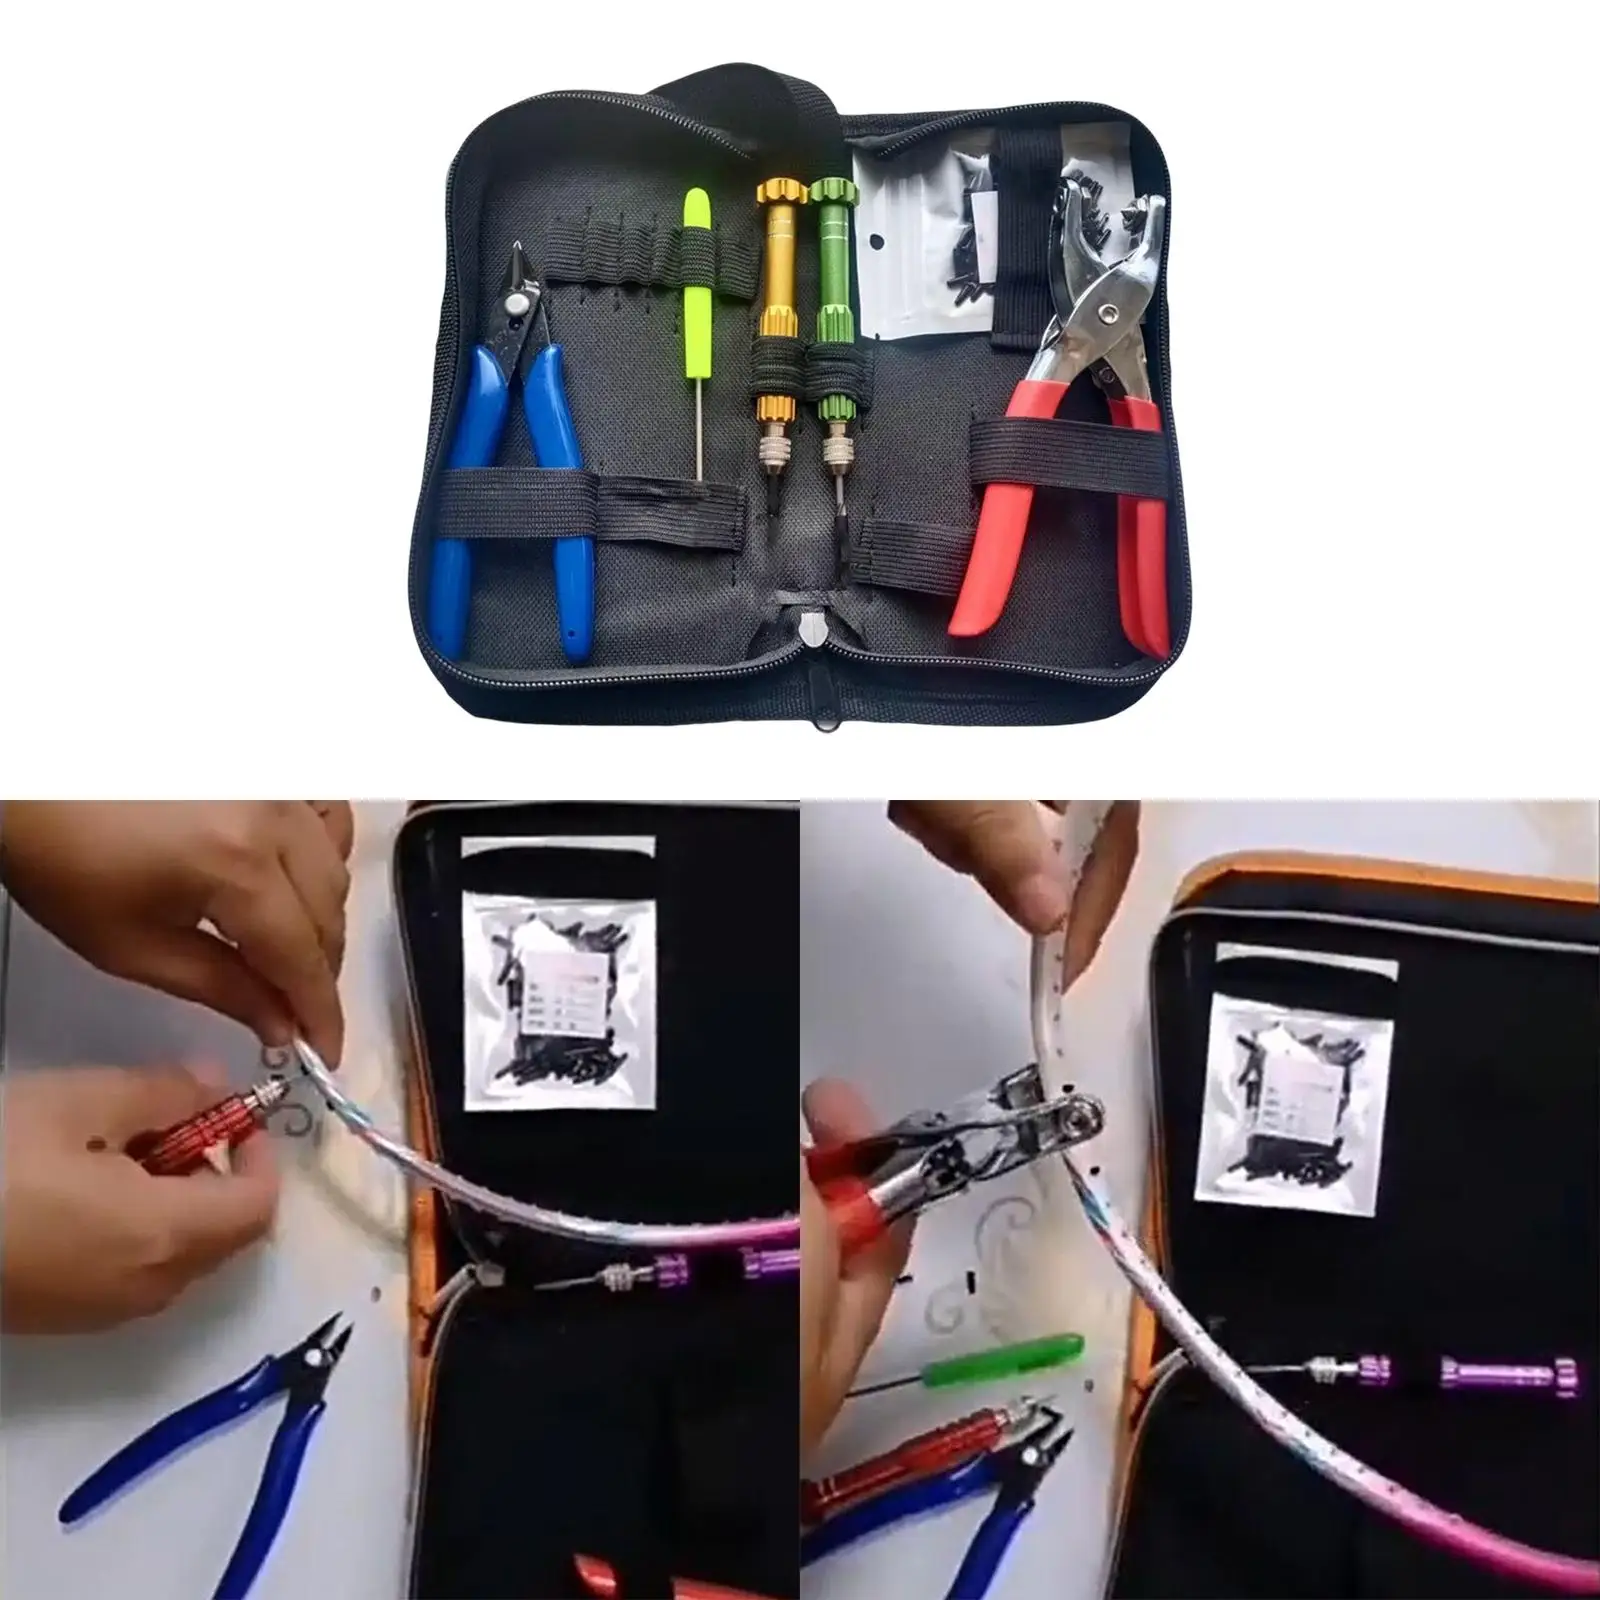 Starting Stringing Clamp Tool Kit with Storage Bag Badminton Racket Cold Press Pliers for Outdoor Sports Accessories Tennis